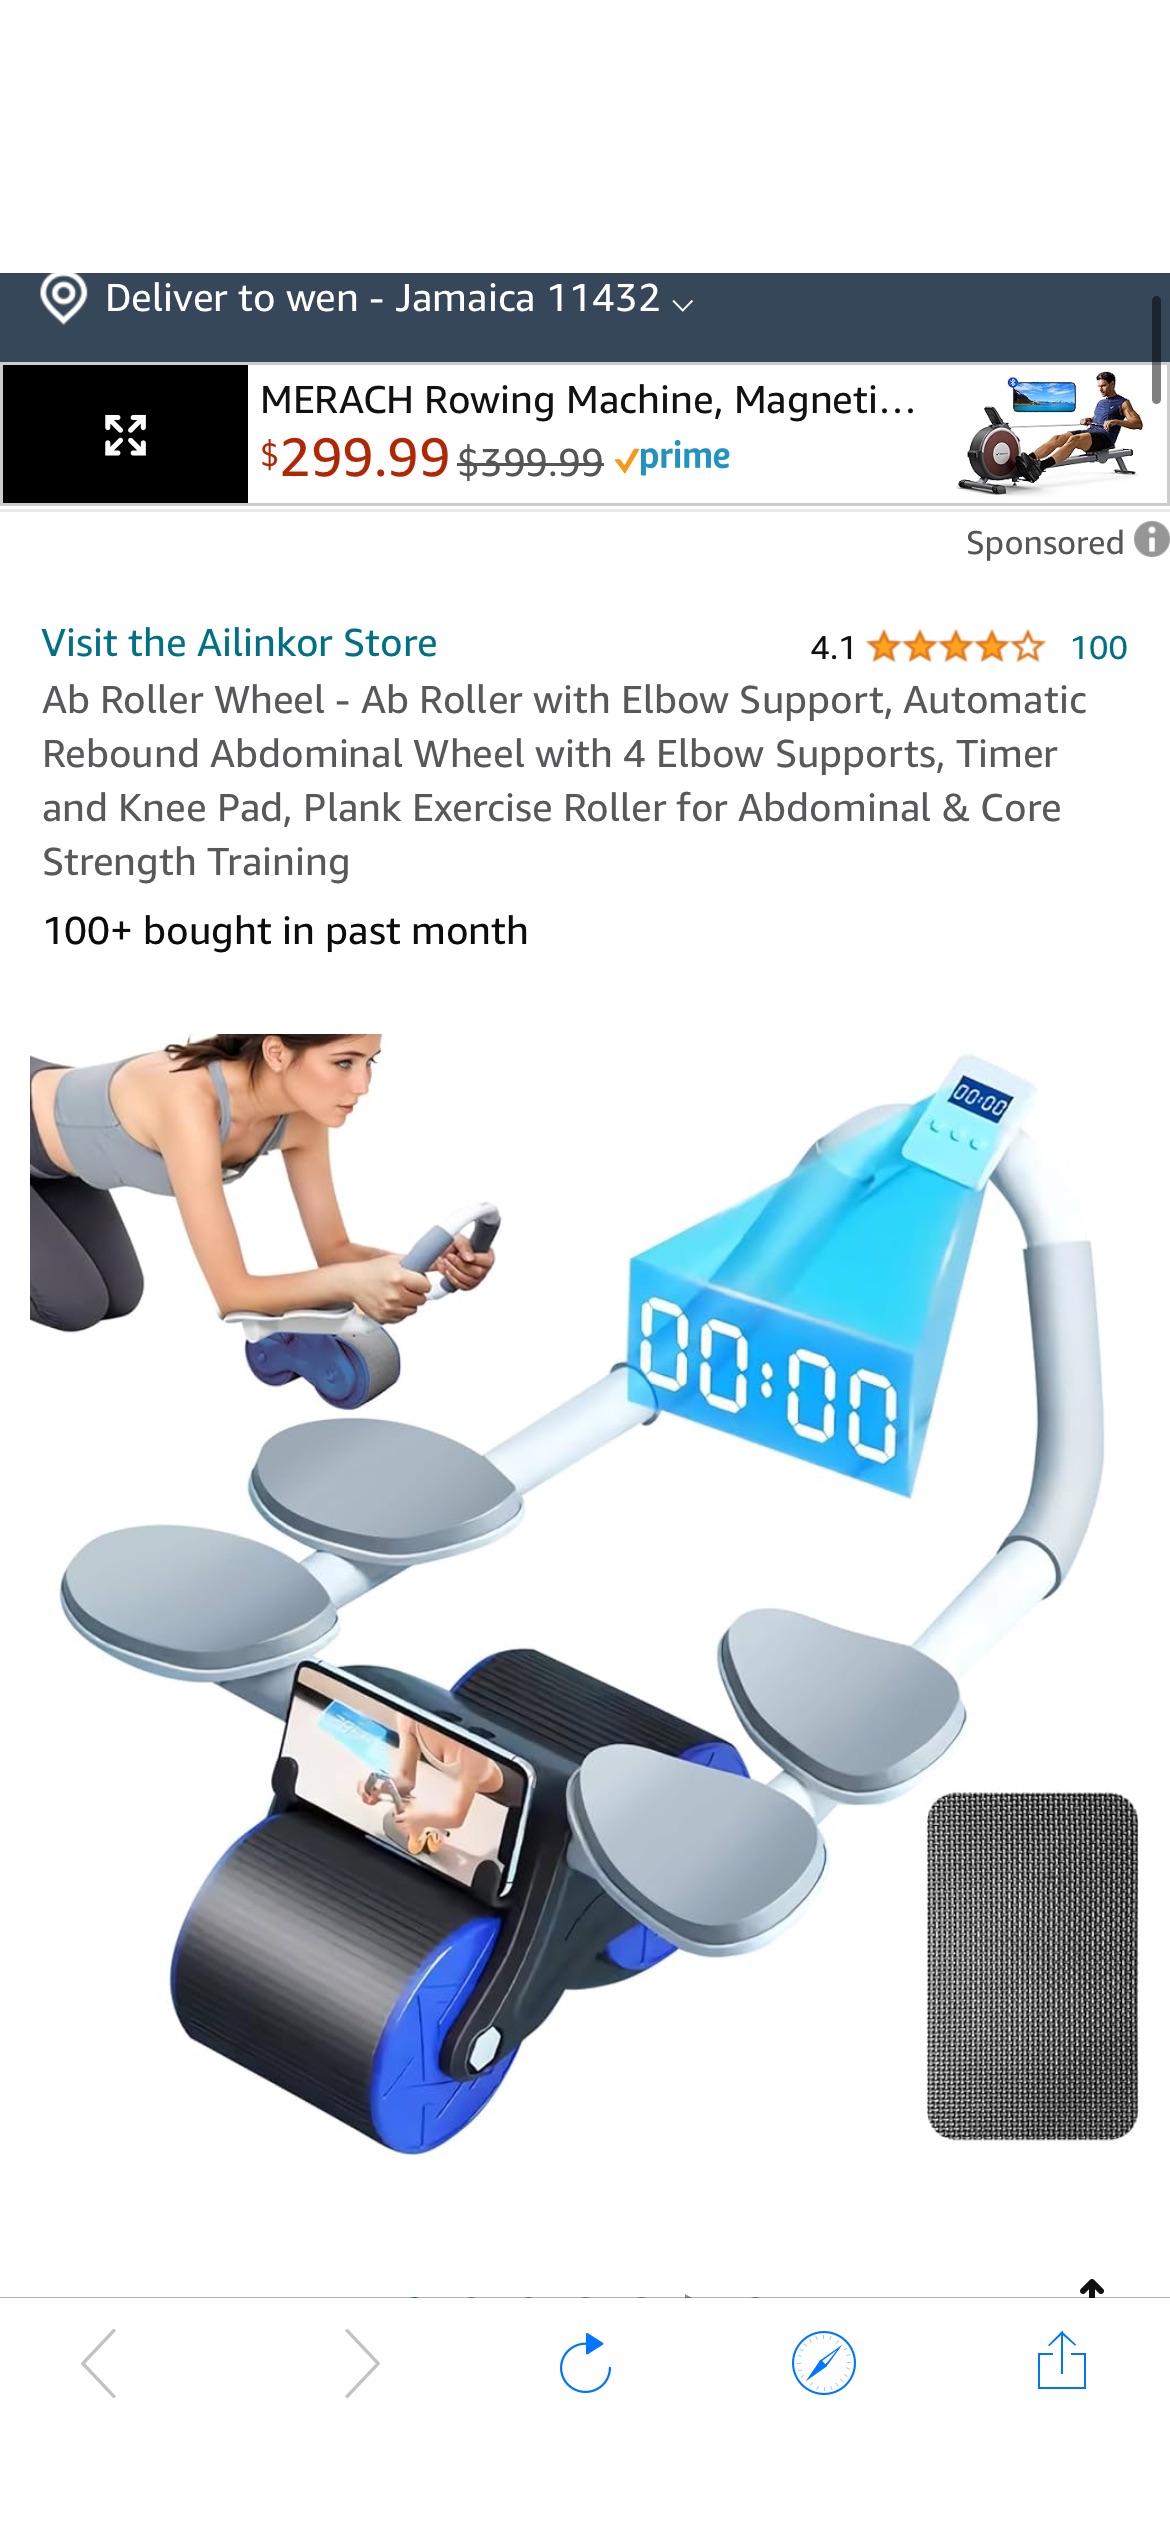 Amazon.com: Ab Roller with Elbow Support, Automatic Rebound Abdominal Wheel with Elbow Support, Ab Wheel Roller for Core Workout, Ab Roller for Abs Workout with Timer, Exercise Roller Wheels for Core 